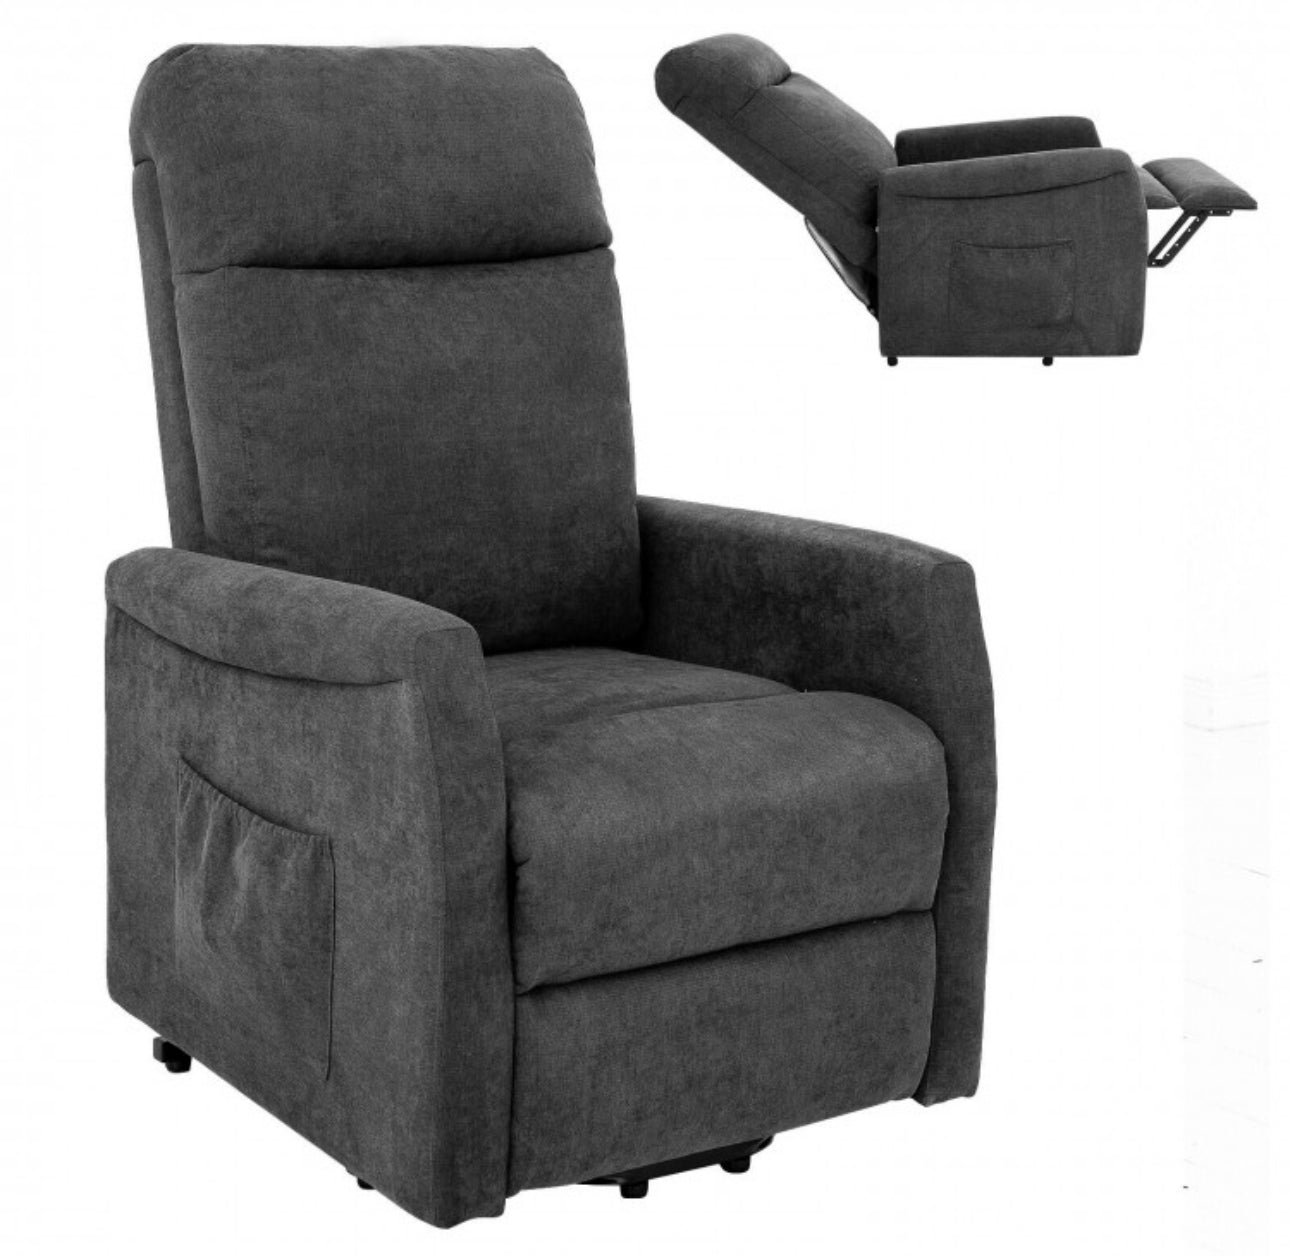 Heavy Duty Modern Power Lift Recliner Chair With Remote Control | For The Elderly | Everyone | Holds 330lbs | Laying | Seating | Standing Easily | Quiet Motor